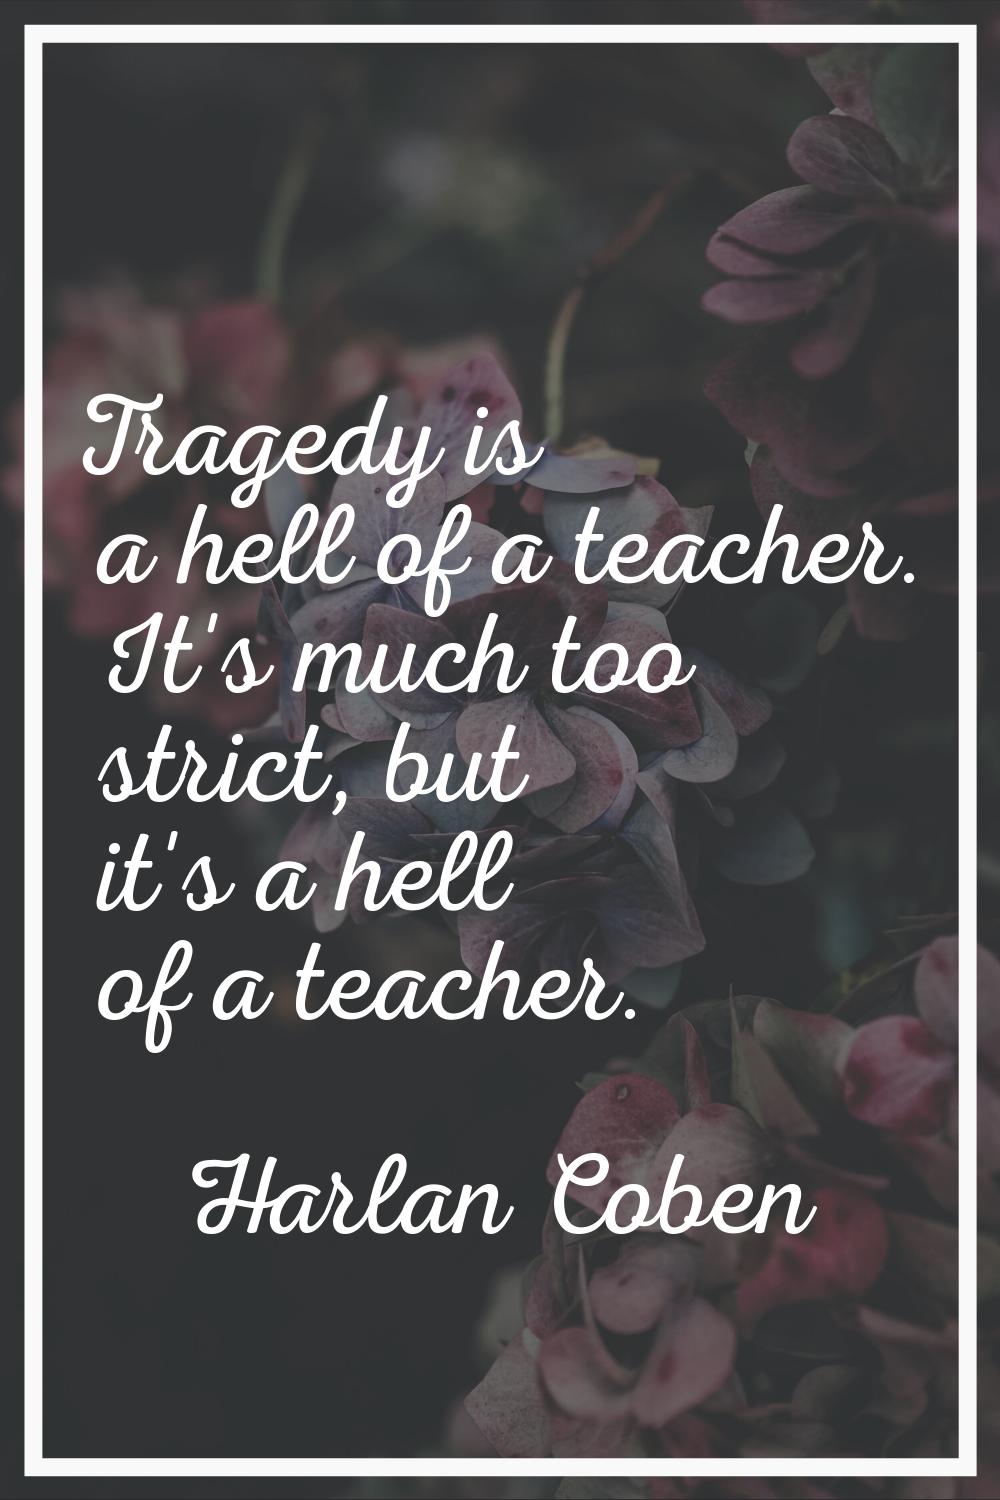 Tragedy is a hell of a teacher. It's much too strict, but it's a hell of a teacher.